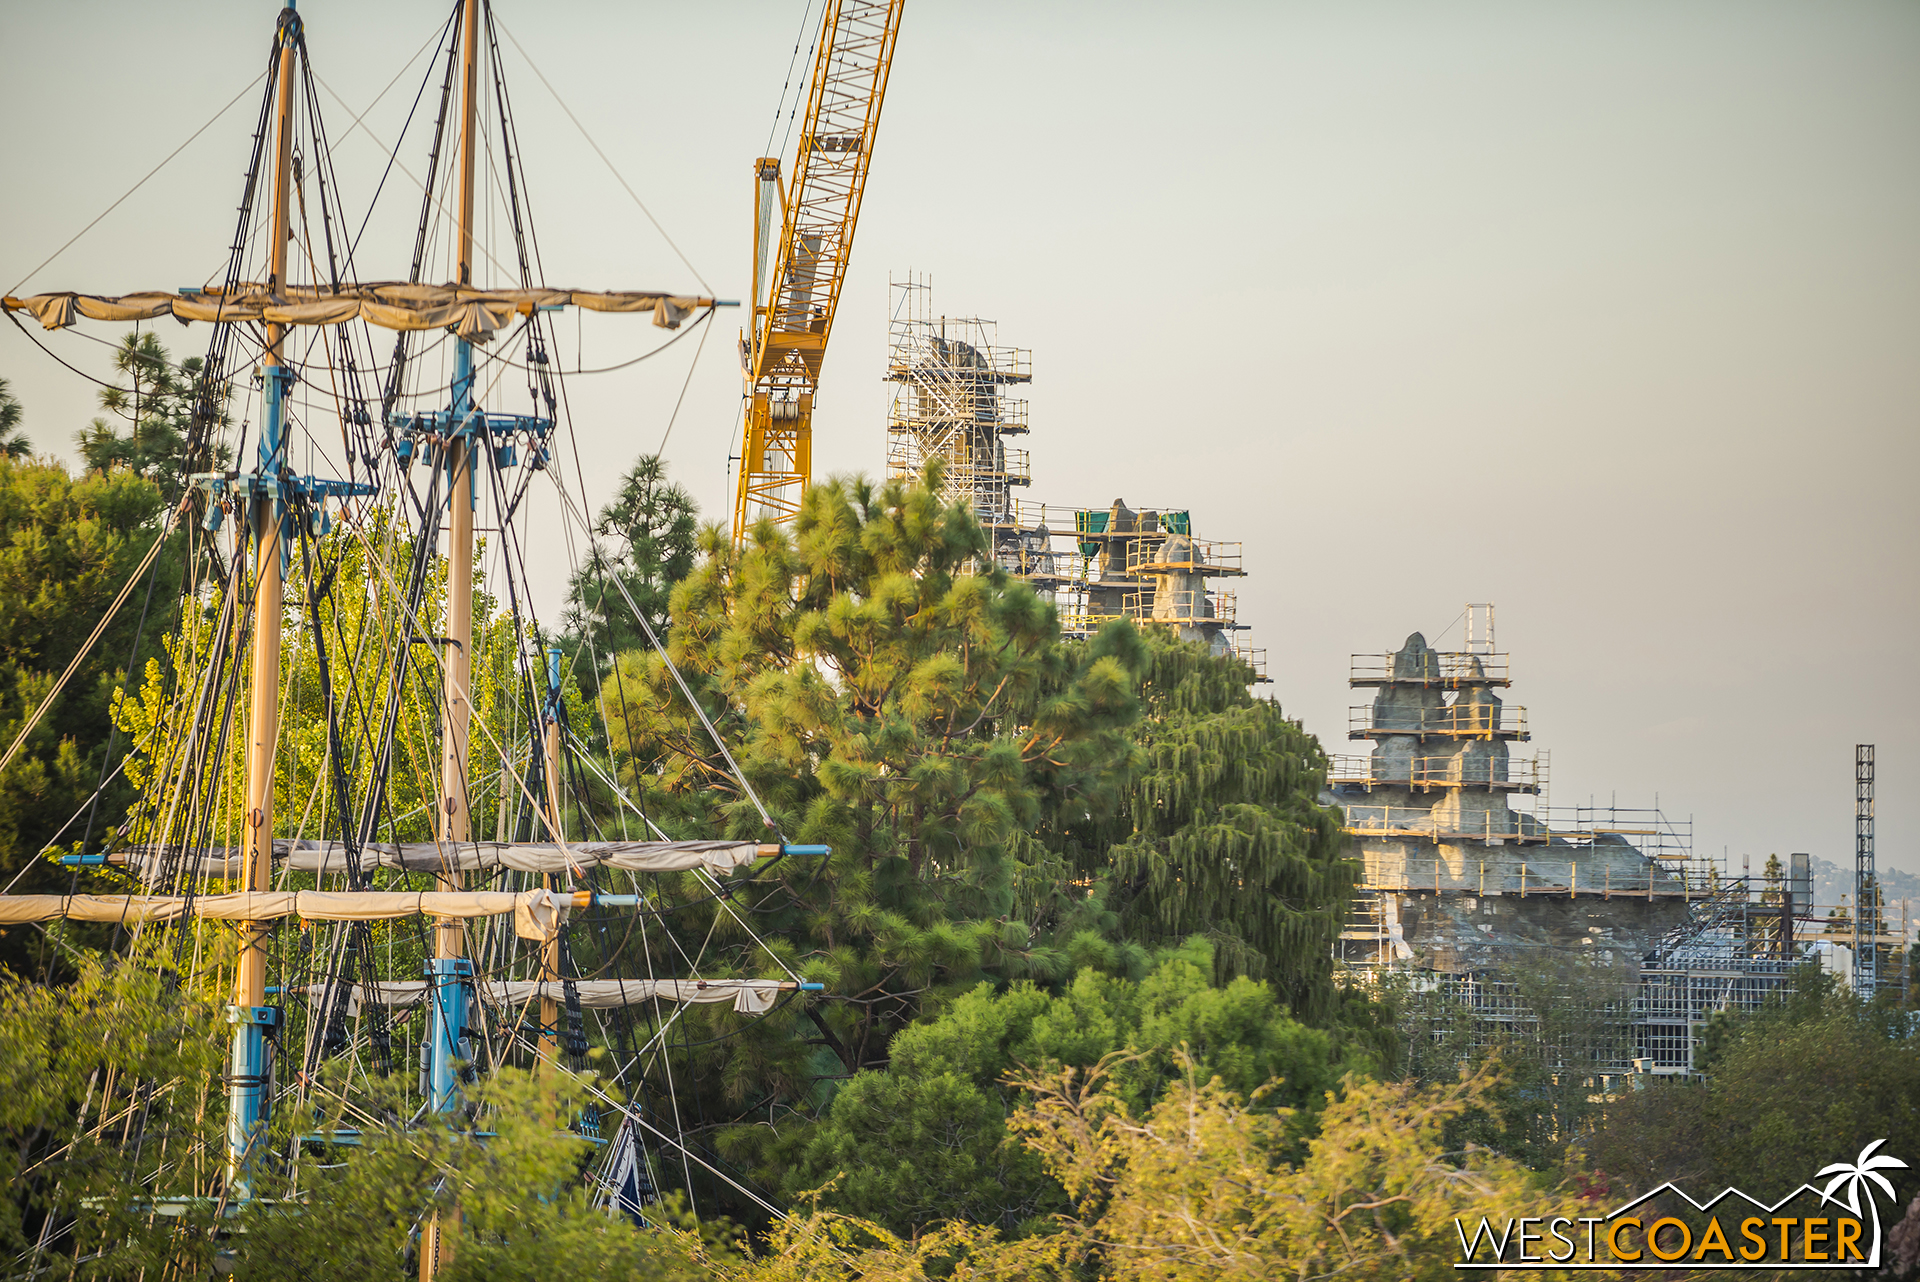  The peaks peek out past the trees of Frontierland. 